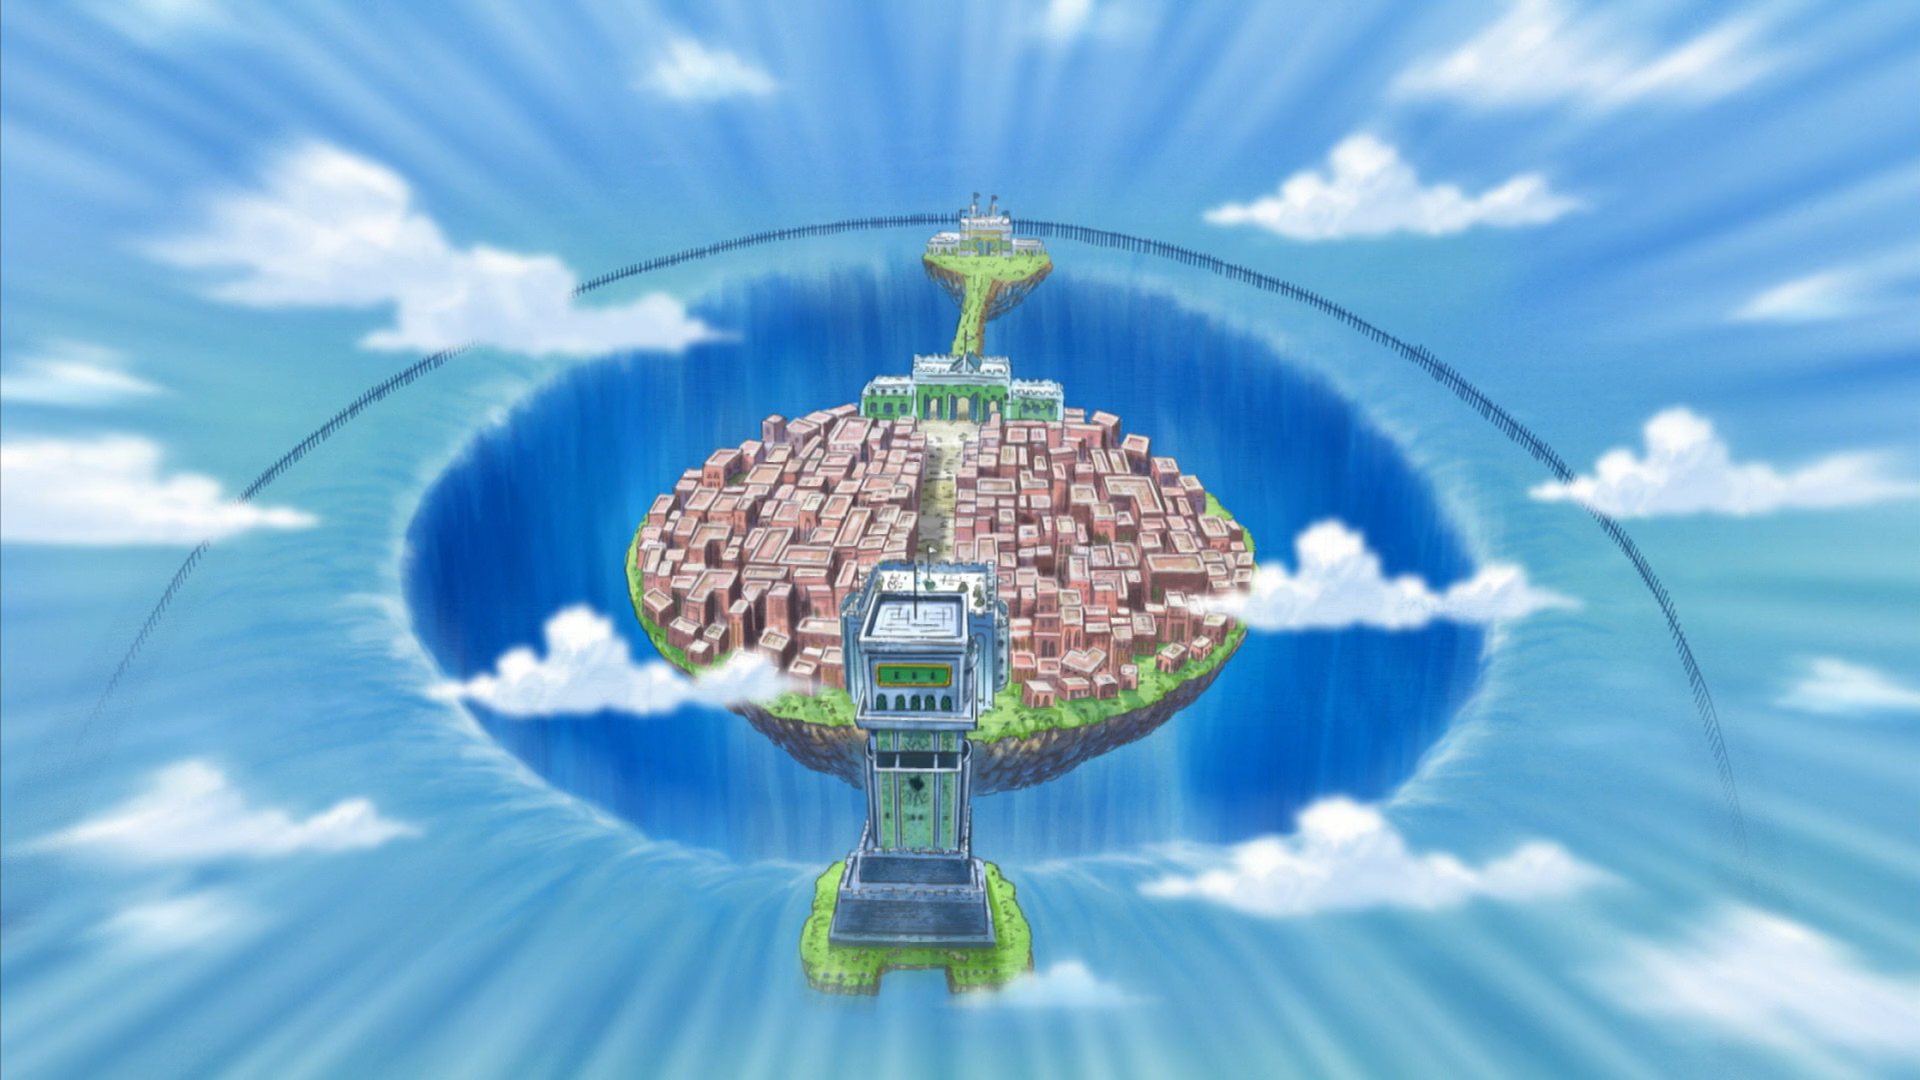 2 One Piece stages: Tower of Justice Corridor and Enies Lobby Coast Latest?cb=20130330041658